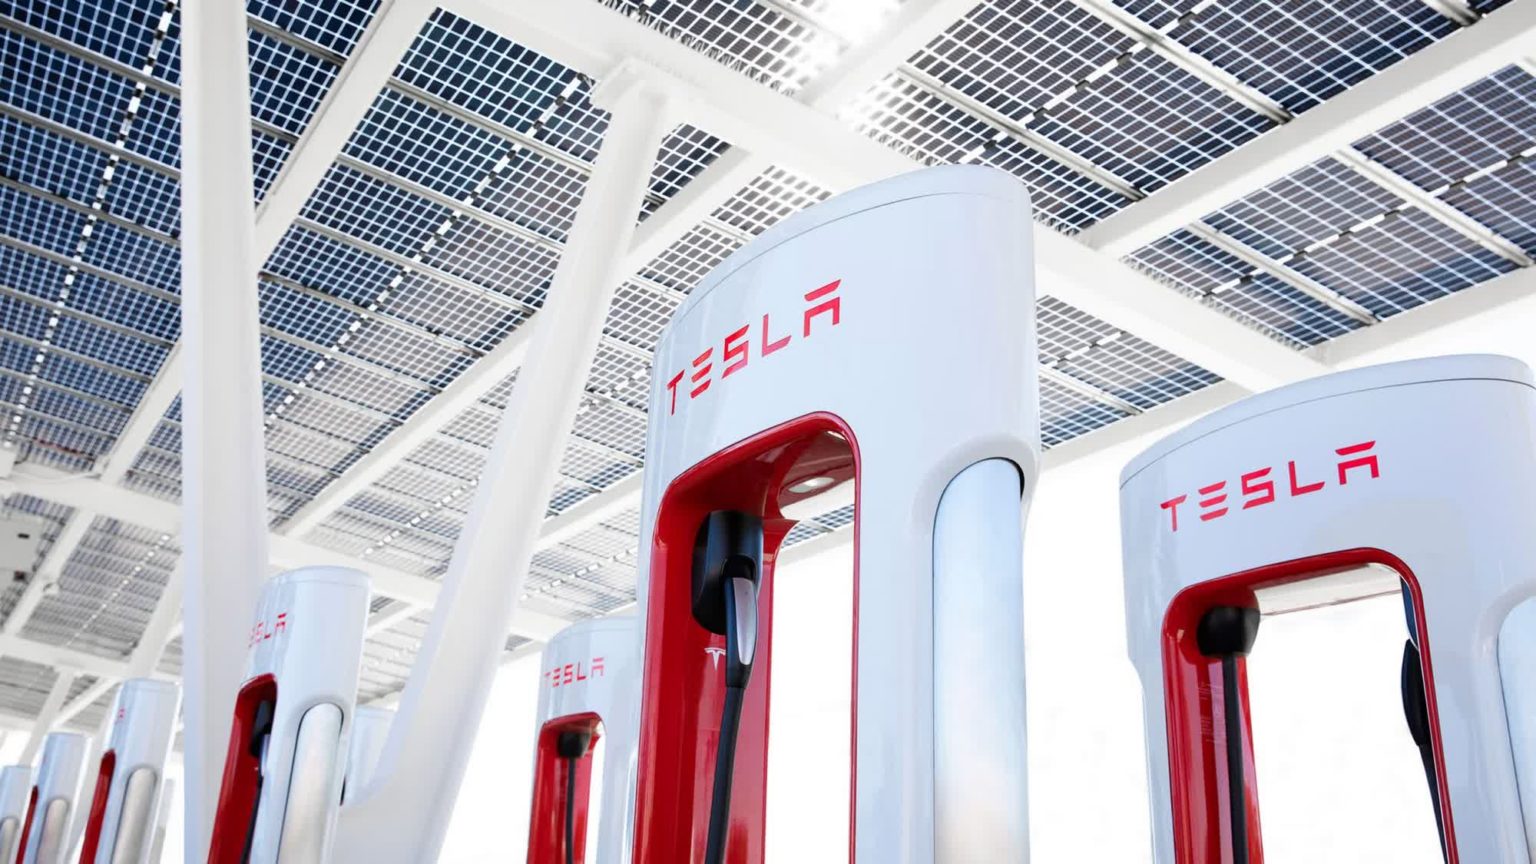 BP is buying Tesla Superchargers worth $100 million for its EV charging network